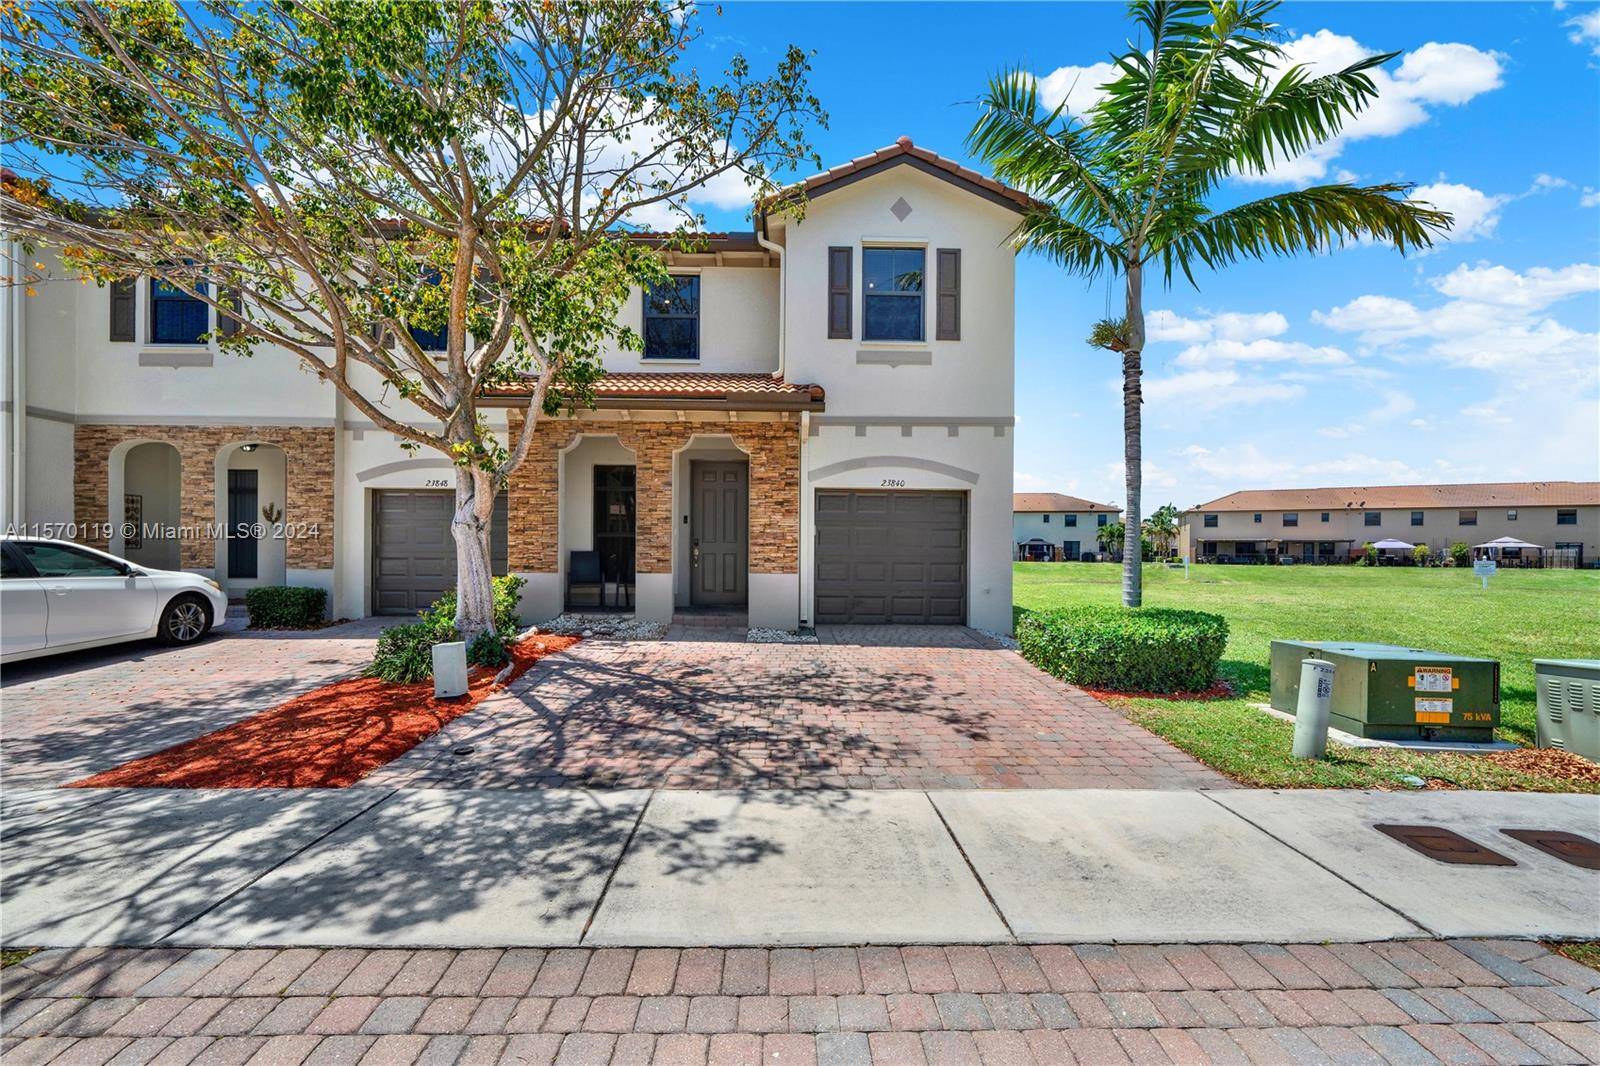 Step into your new home sweet home in the heart of Silver Palm !